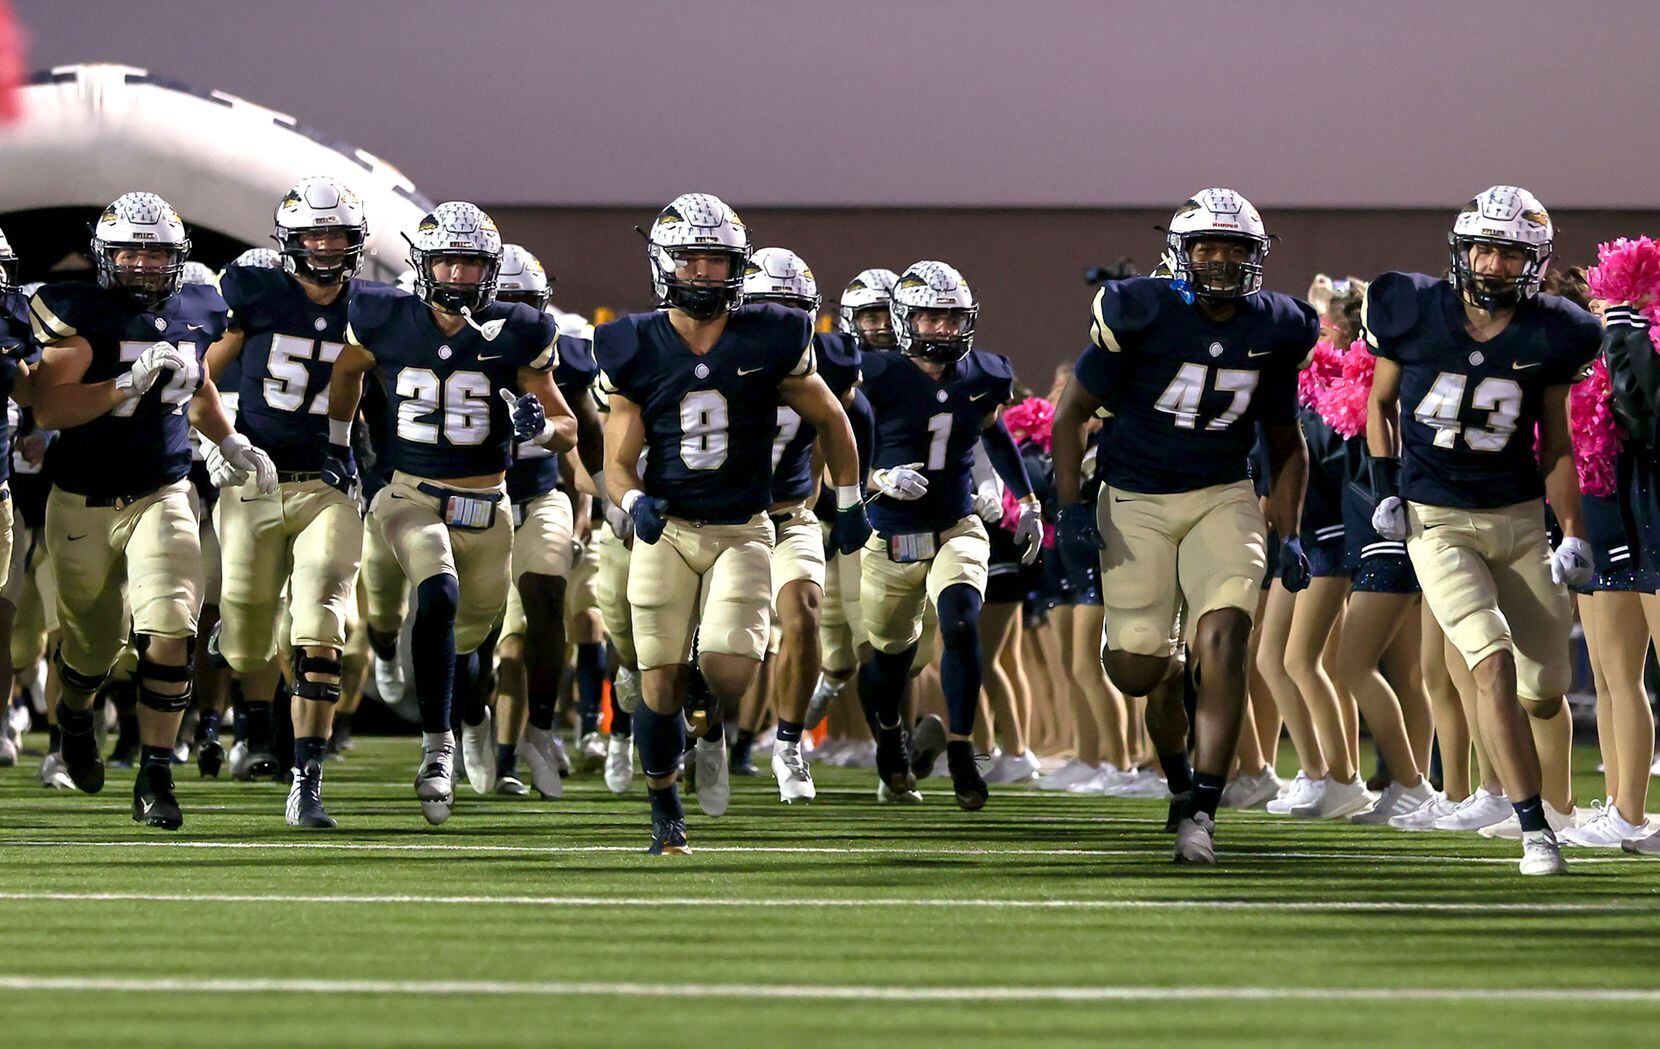 The Keller Indians enter the field to take on Byron Nelson at a District 4-6A high school...